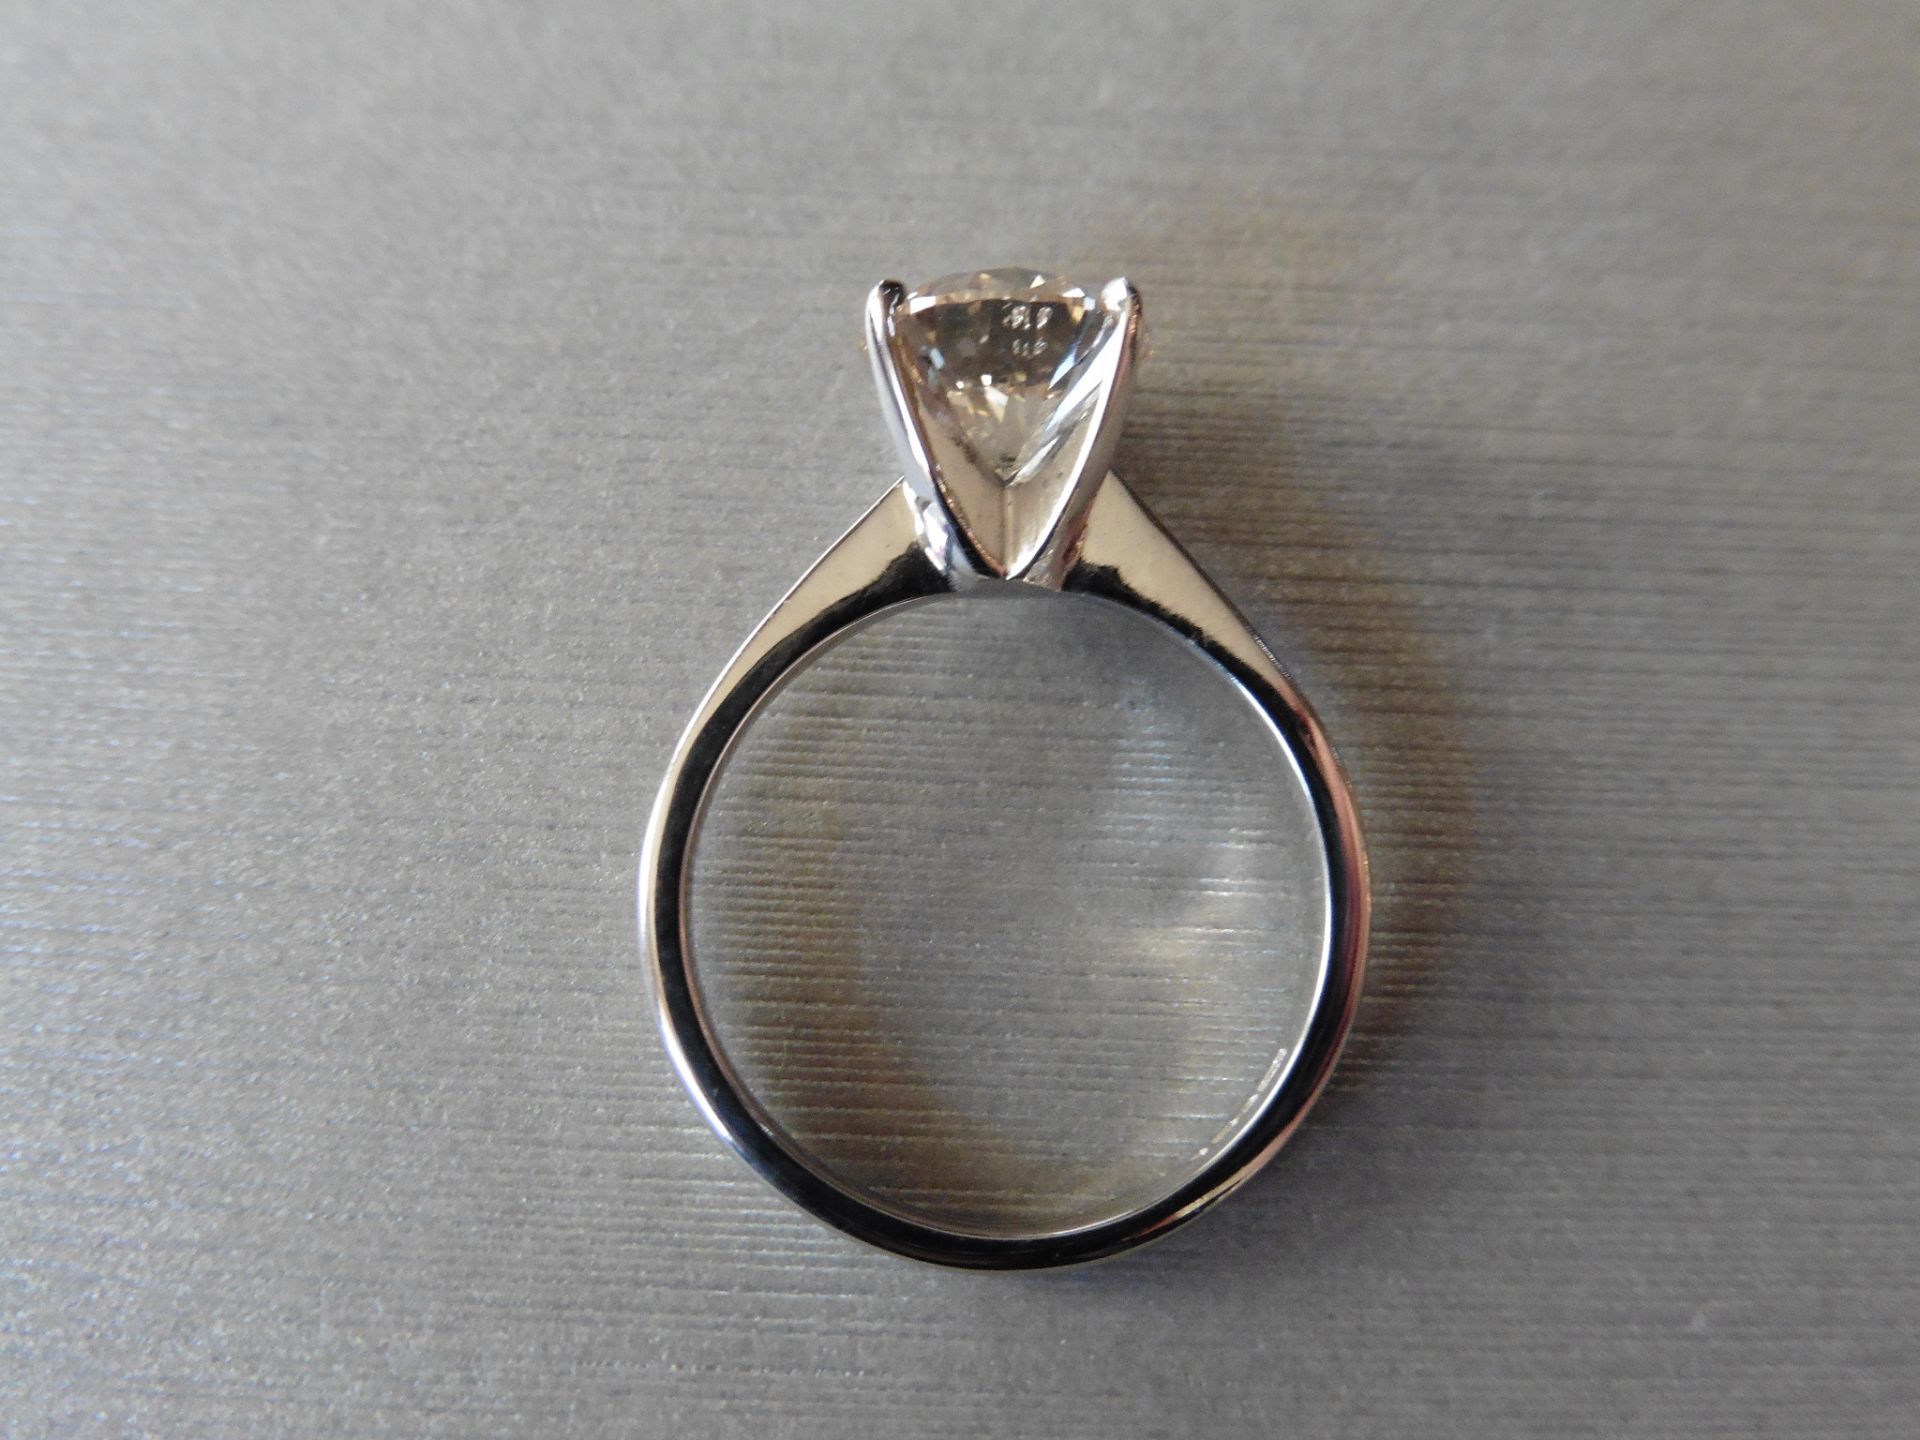 2.03ct brilliant cut diamond solitaire ring set in 18ct white gold. K colour, Si2 clarity. - Image 2 of 5